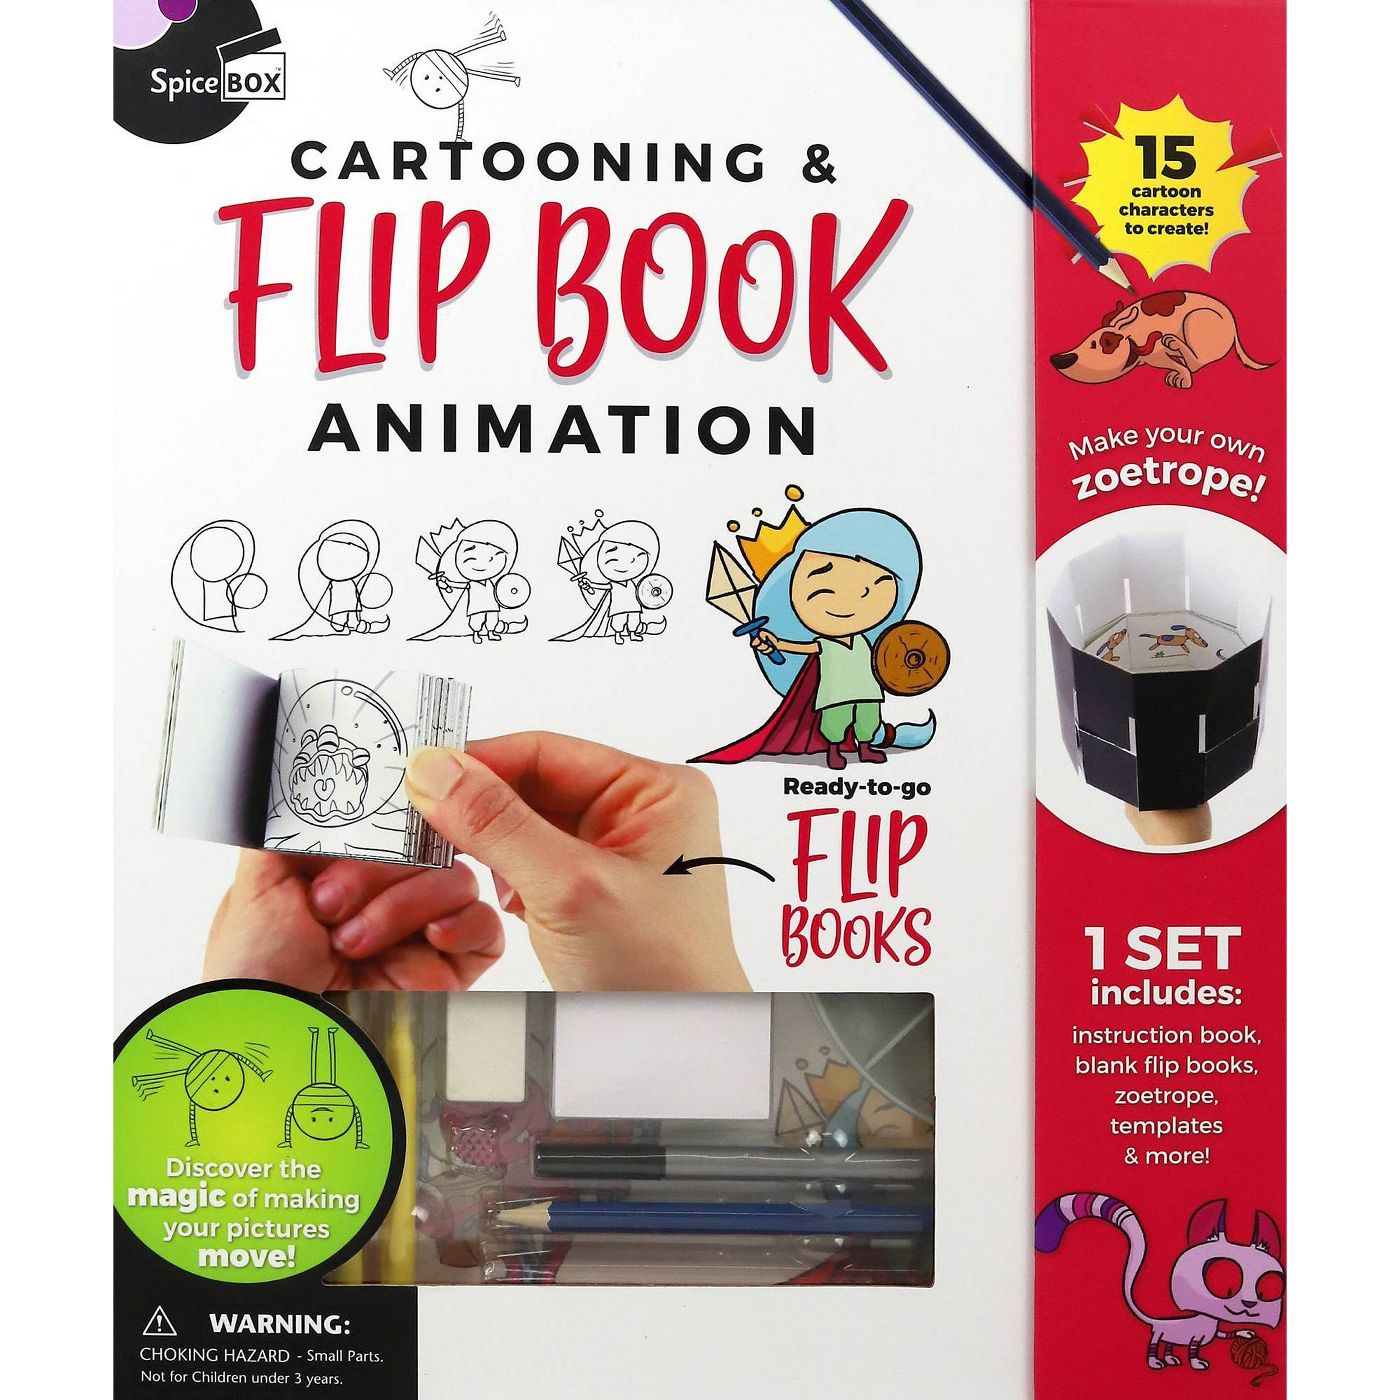 Cartooning & Flip Book Animation Drawing Set - A2Z Science & Learning Toy  Store